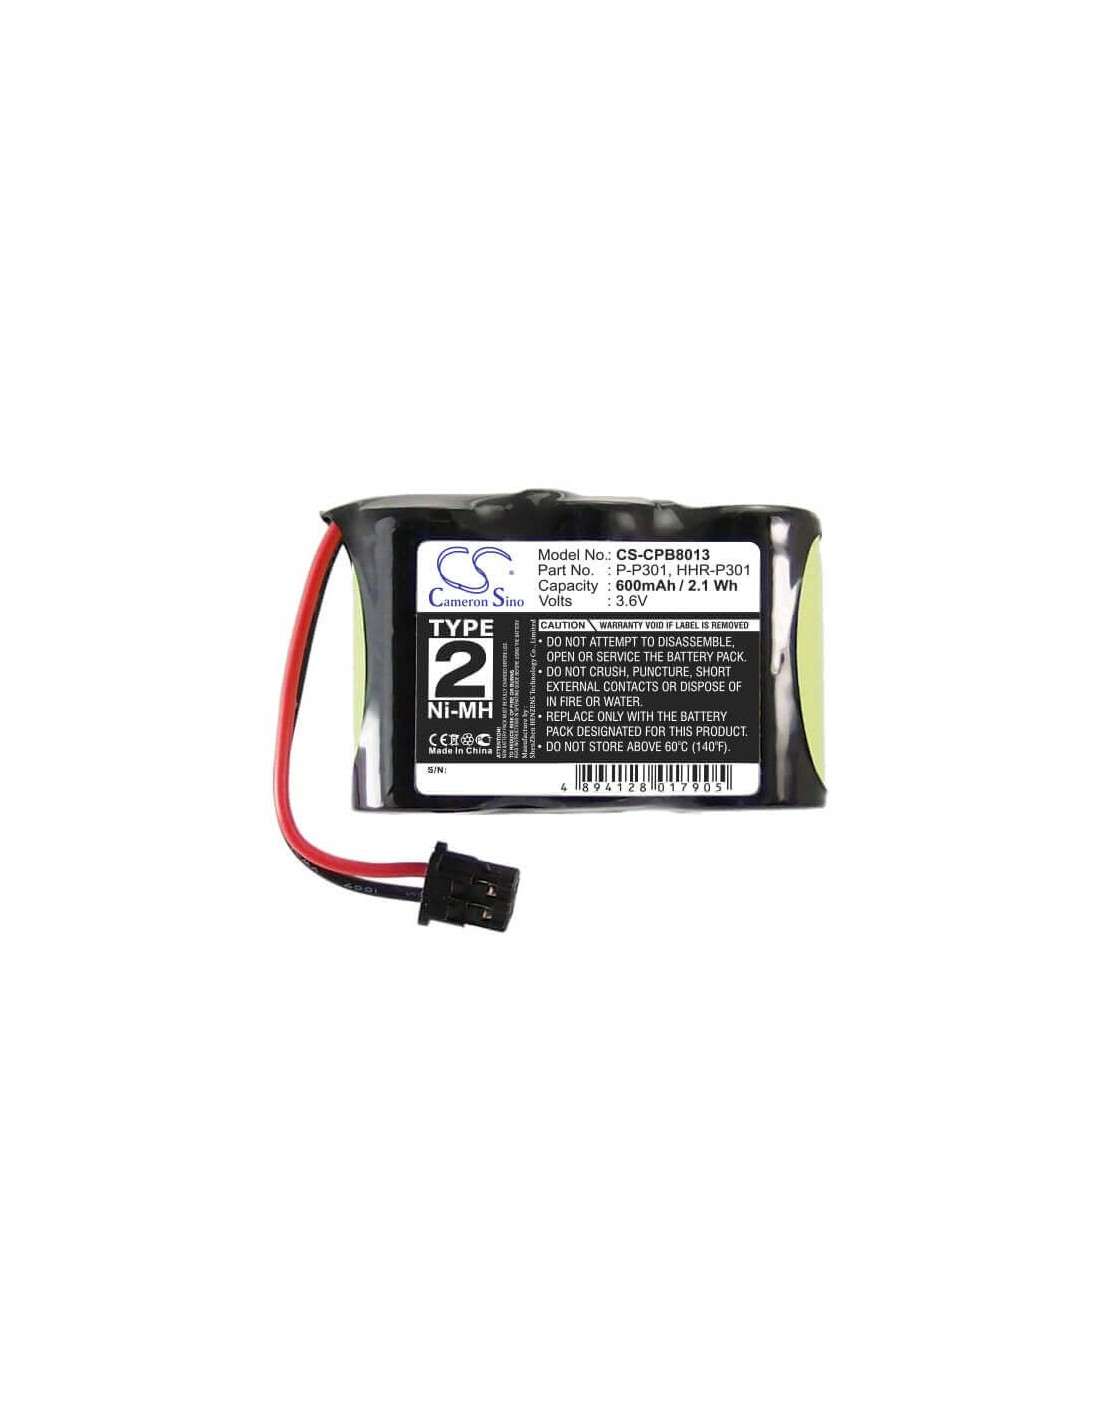 Battery for Toshiba, Trb-6500 3.6V, 600mAh - 2.16Wh